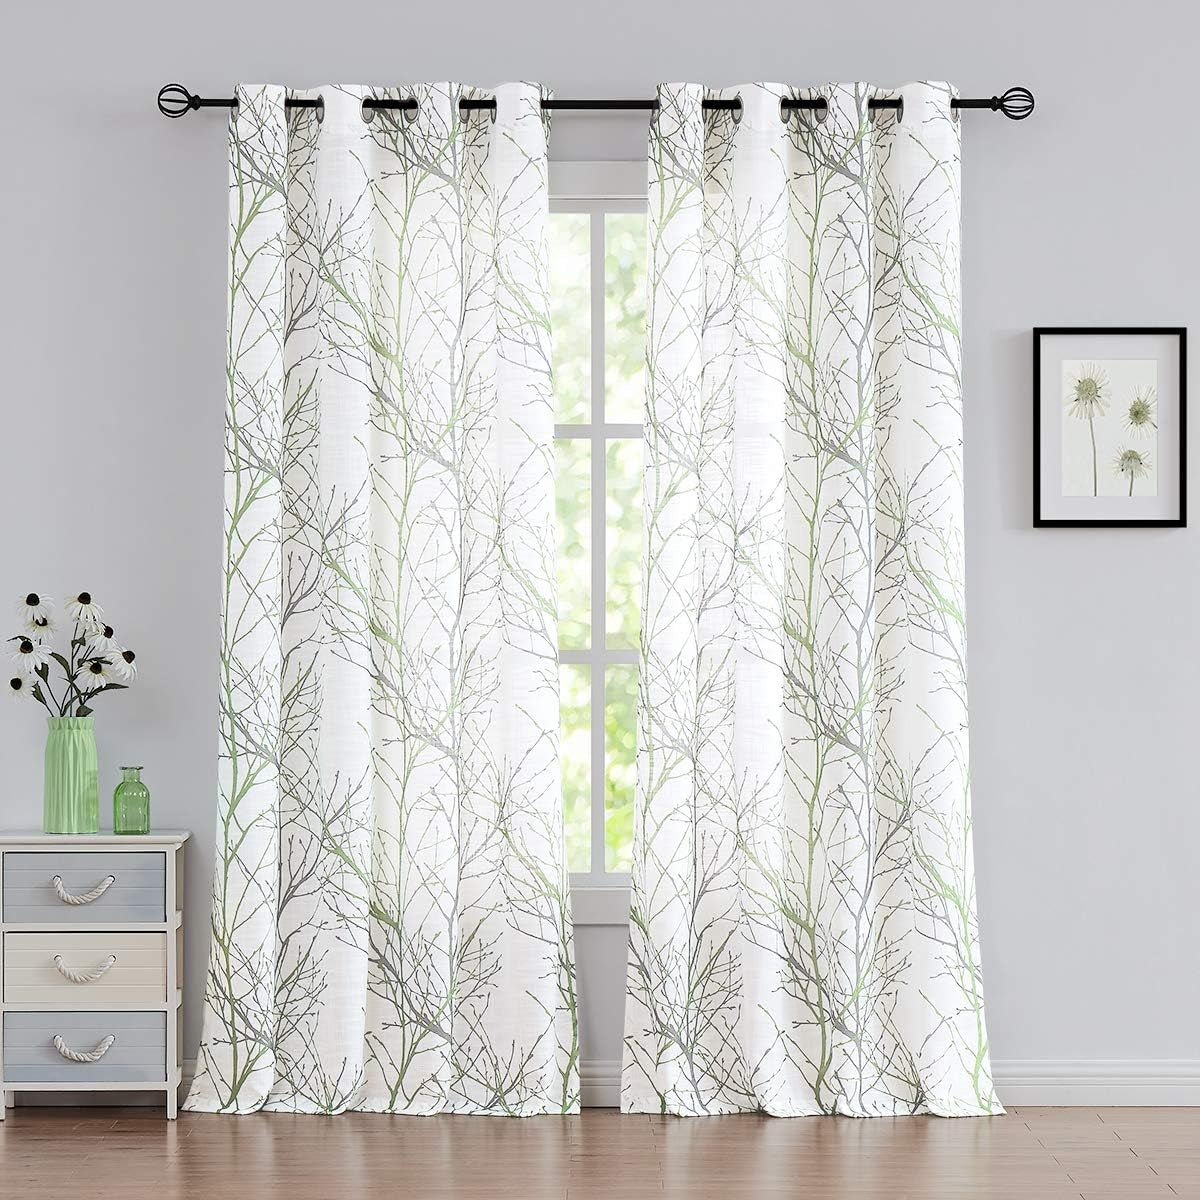 FMFUNCTEX Blue White Curtains for Kitchen Living Room 72“ Grey Tree Branches Print Curtain Set for Small Windows Linen Textured Semi-Sheer Drapes for Bedroom Grommet Top, 2 Panels  Fmfunctex Green 50" X 84" |2Pcs 